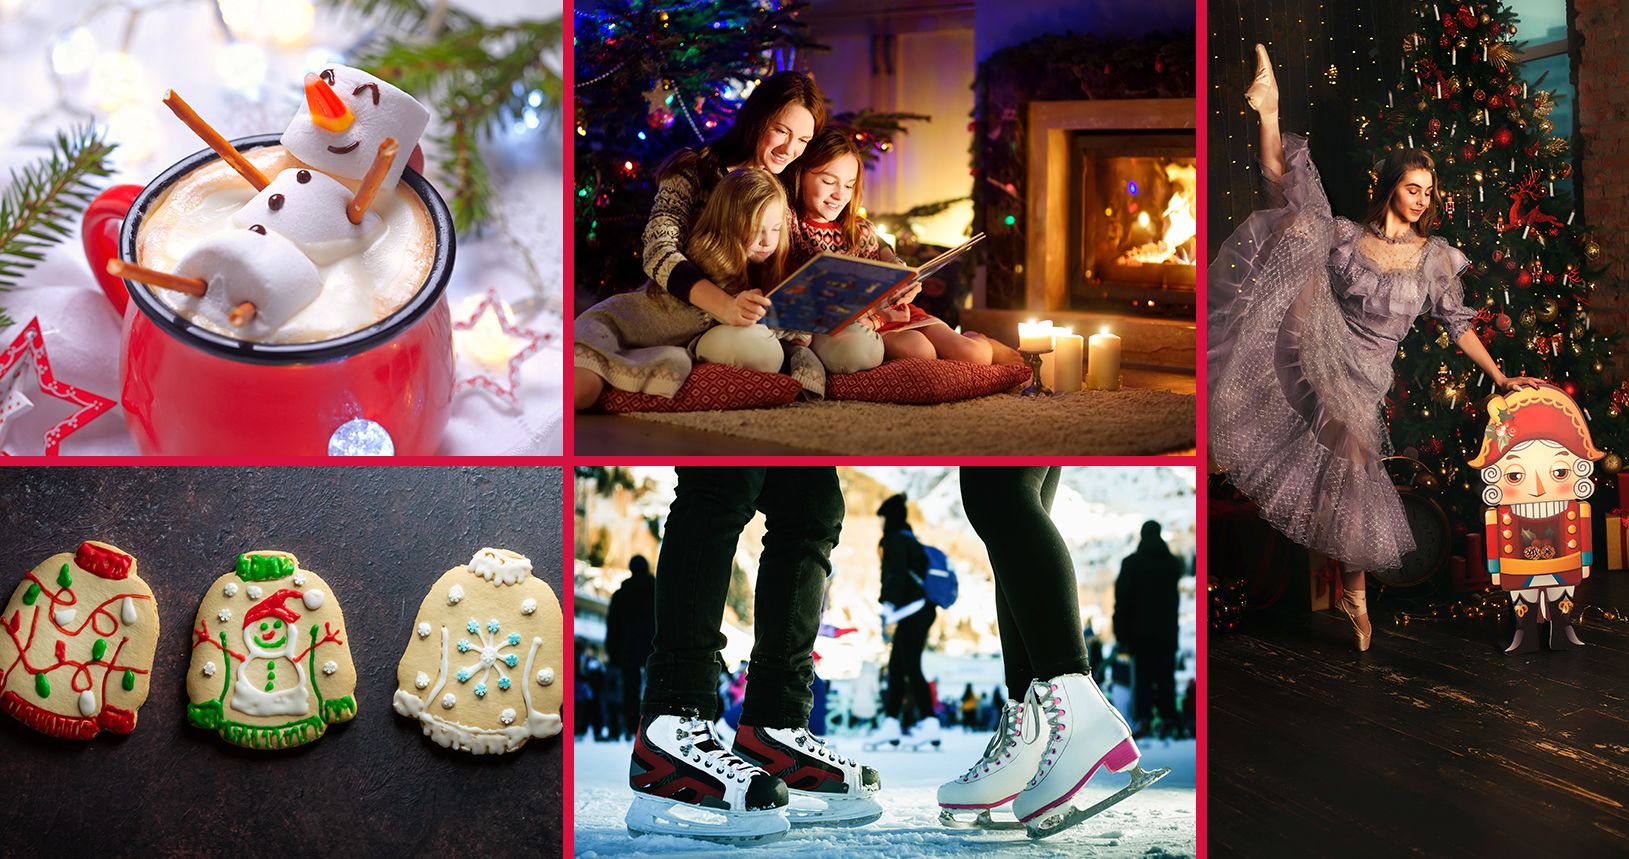 10 Holiday Traditions To Make The Season Extra Special